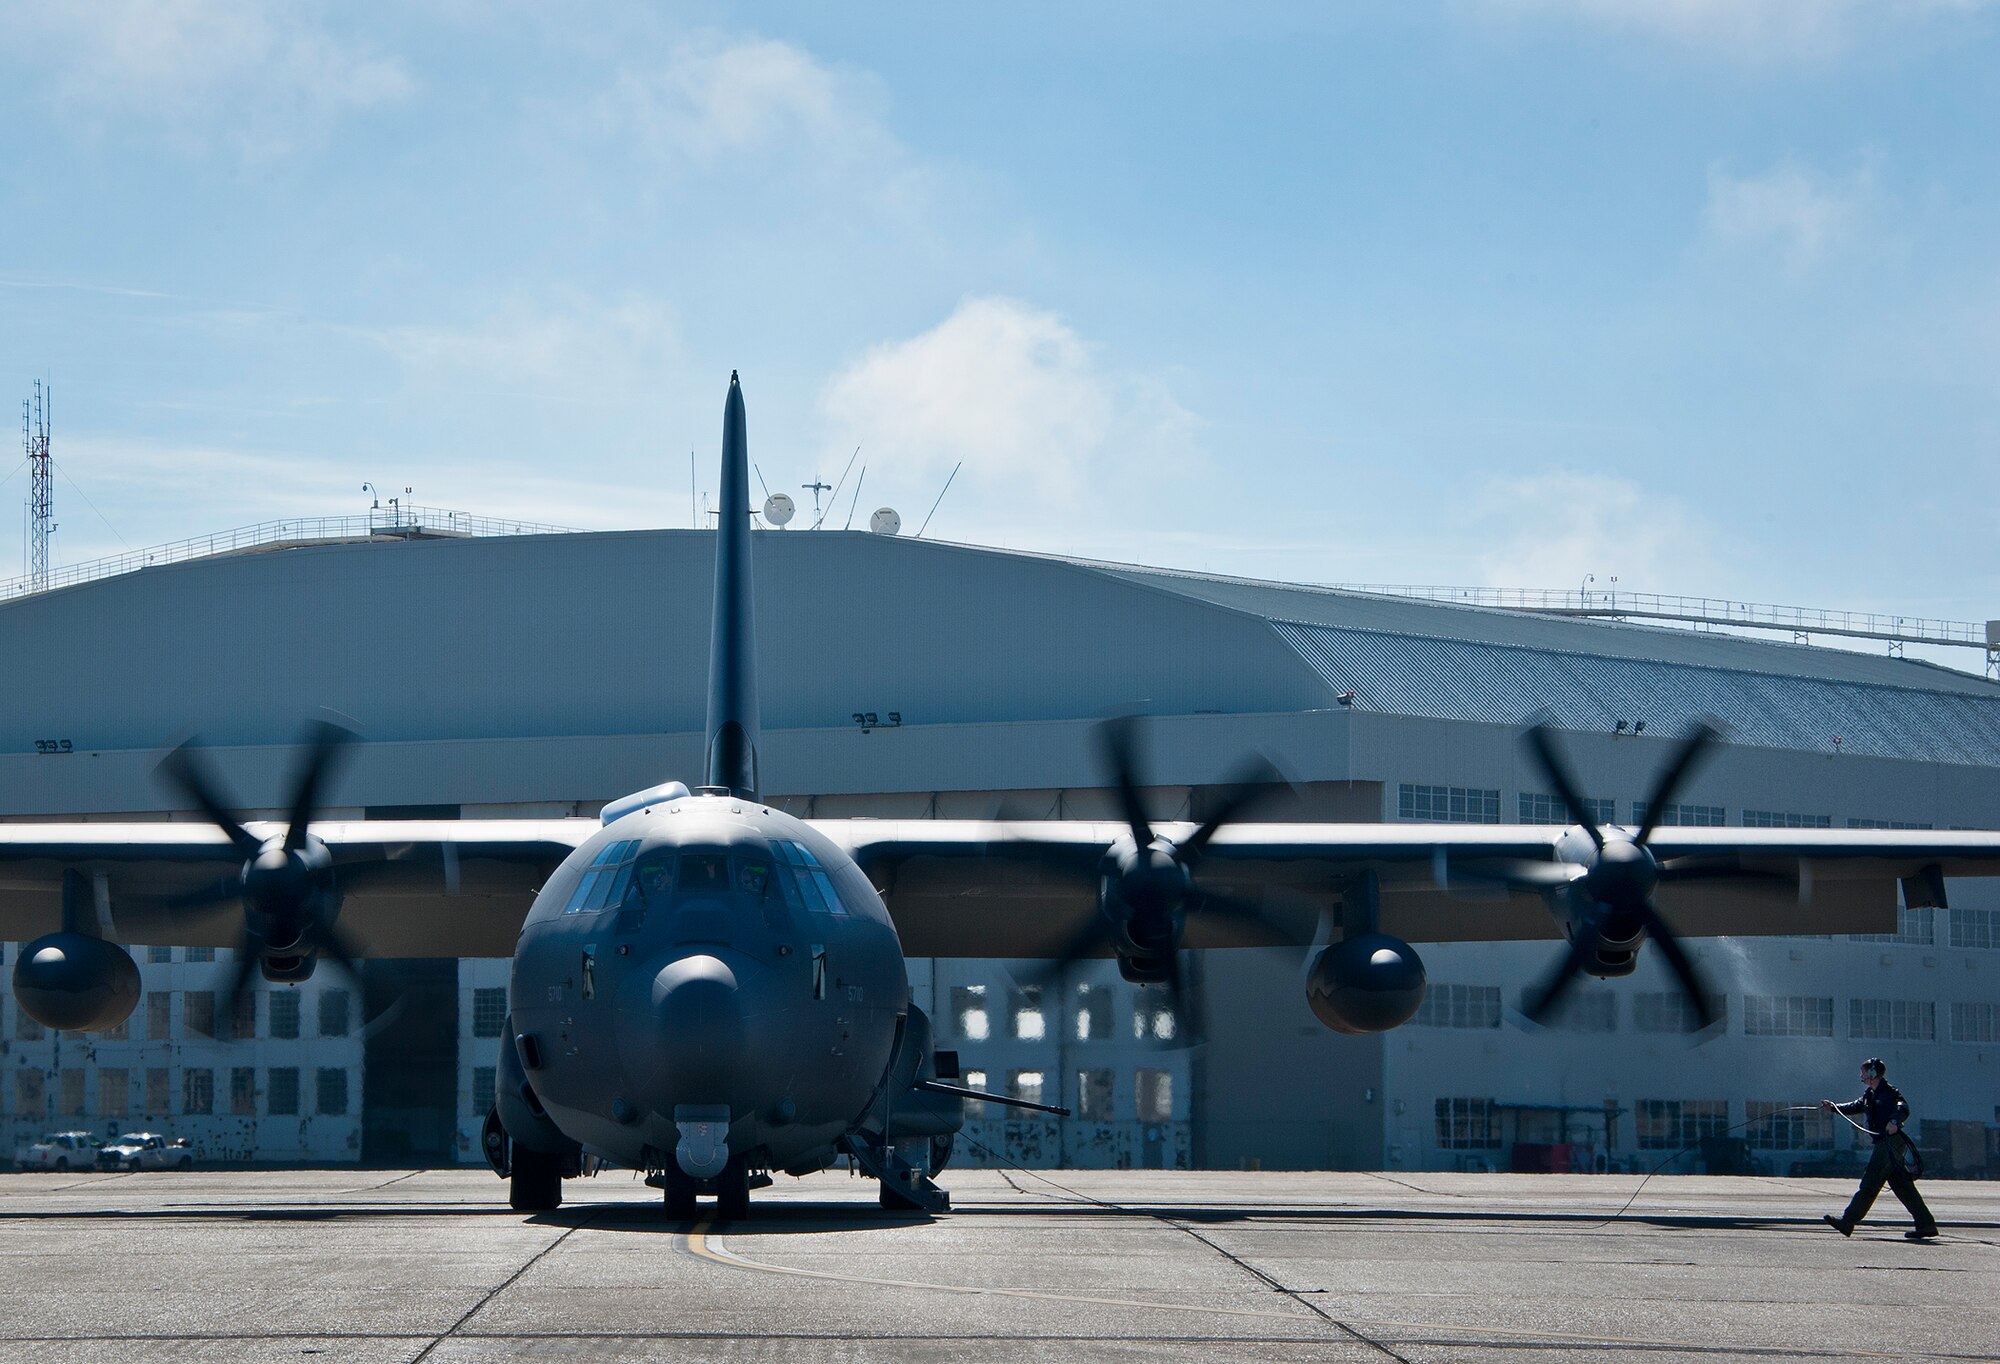 The aircrew from Eglin’s 413th Flight Test Squadron prepares the newly created AC-130J Ghostrider for takeoff for its first official sortie Jan. 31 at Eglin Air Force Base, Fla. The Air Force Special Operations Command MC-130J arrived at Eglin in January 2013 to begin the modification process for the AC-130J, whose primary mission is close air support, air interdiction and armed reconnaissance. A total of 32 MC-130J prototypes will be modified as part of a $2.4 billion AC-130J program to grow the future fleet. (U.S. Air Force photo/Sara Vidoni)